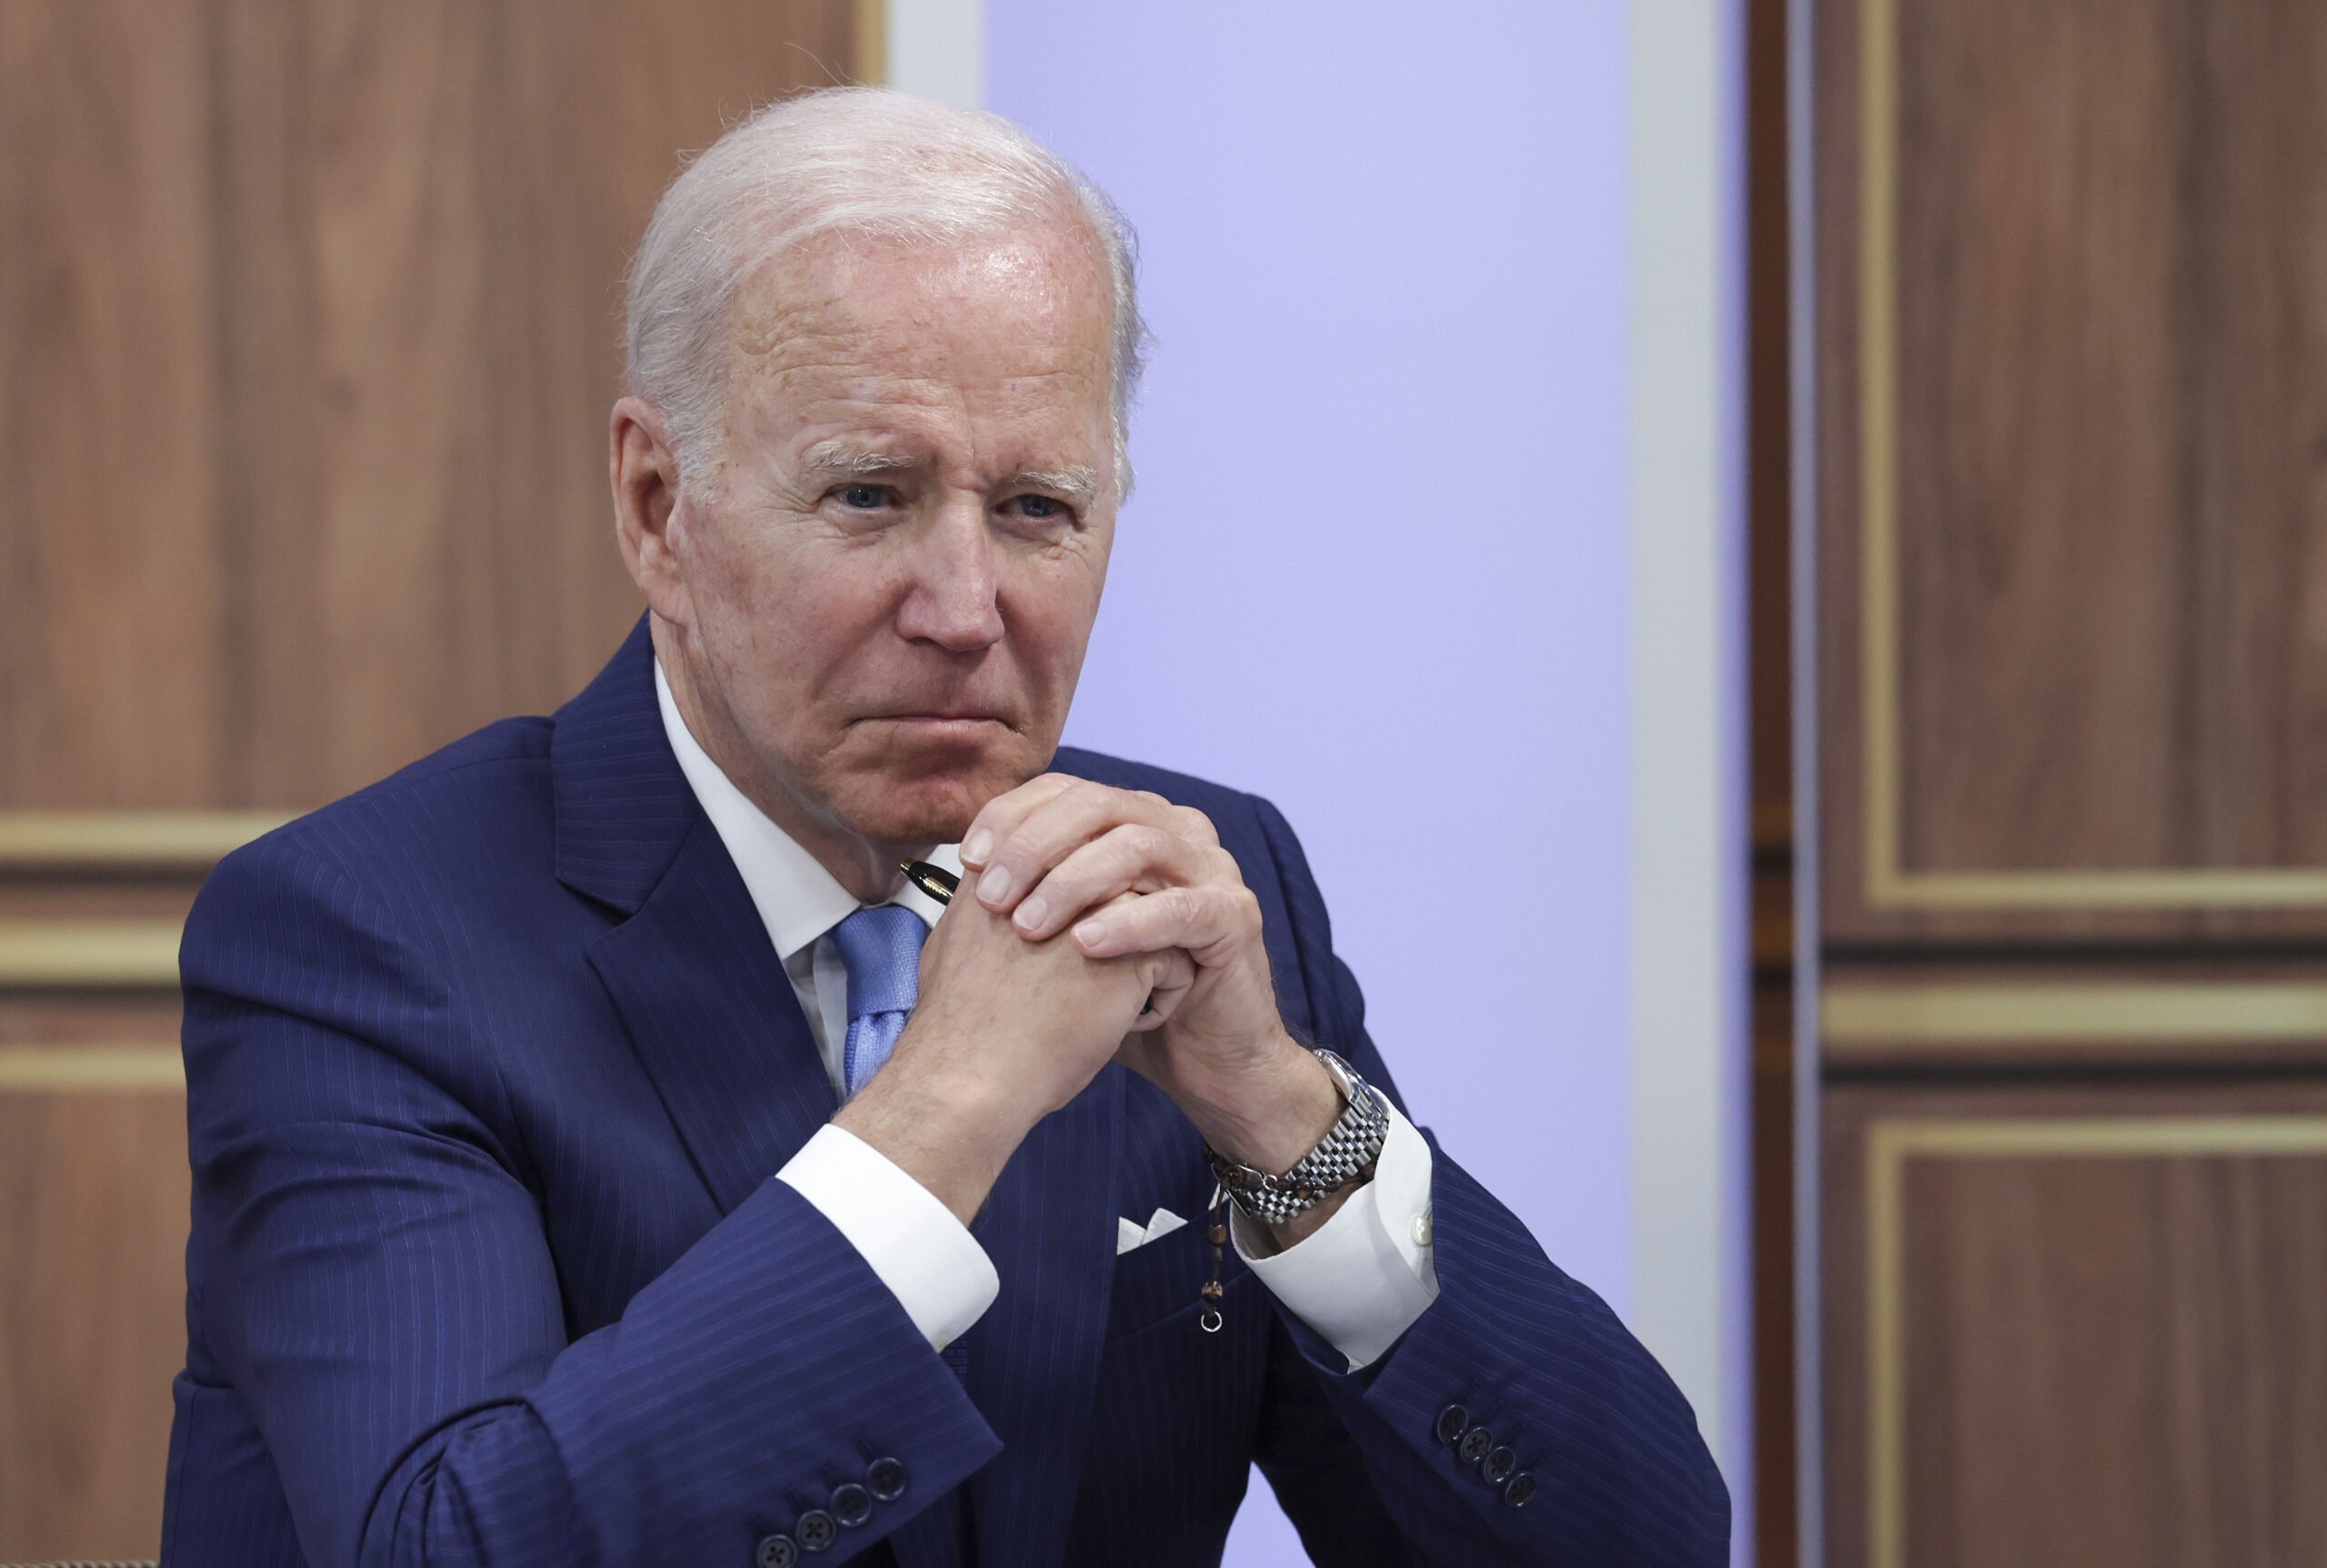 Biden Says U.S. is NOT Going Into a Recession When Pressed By Fox News